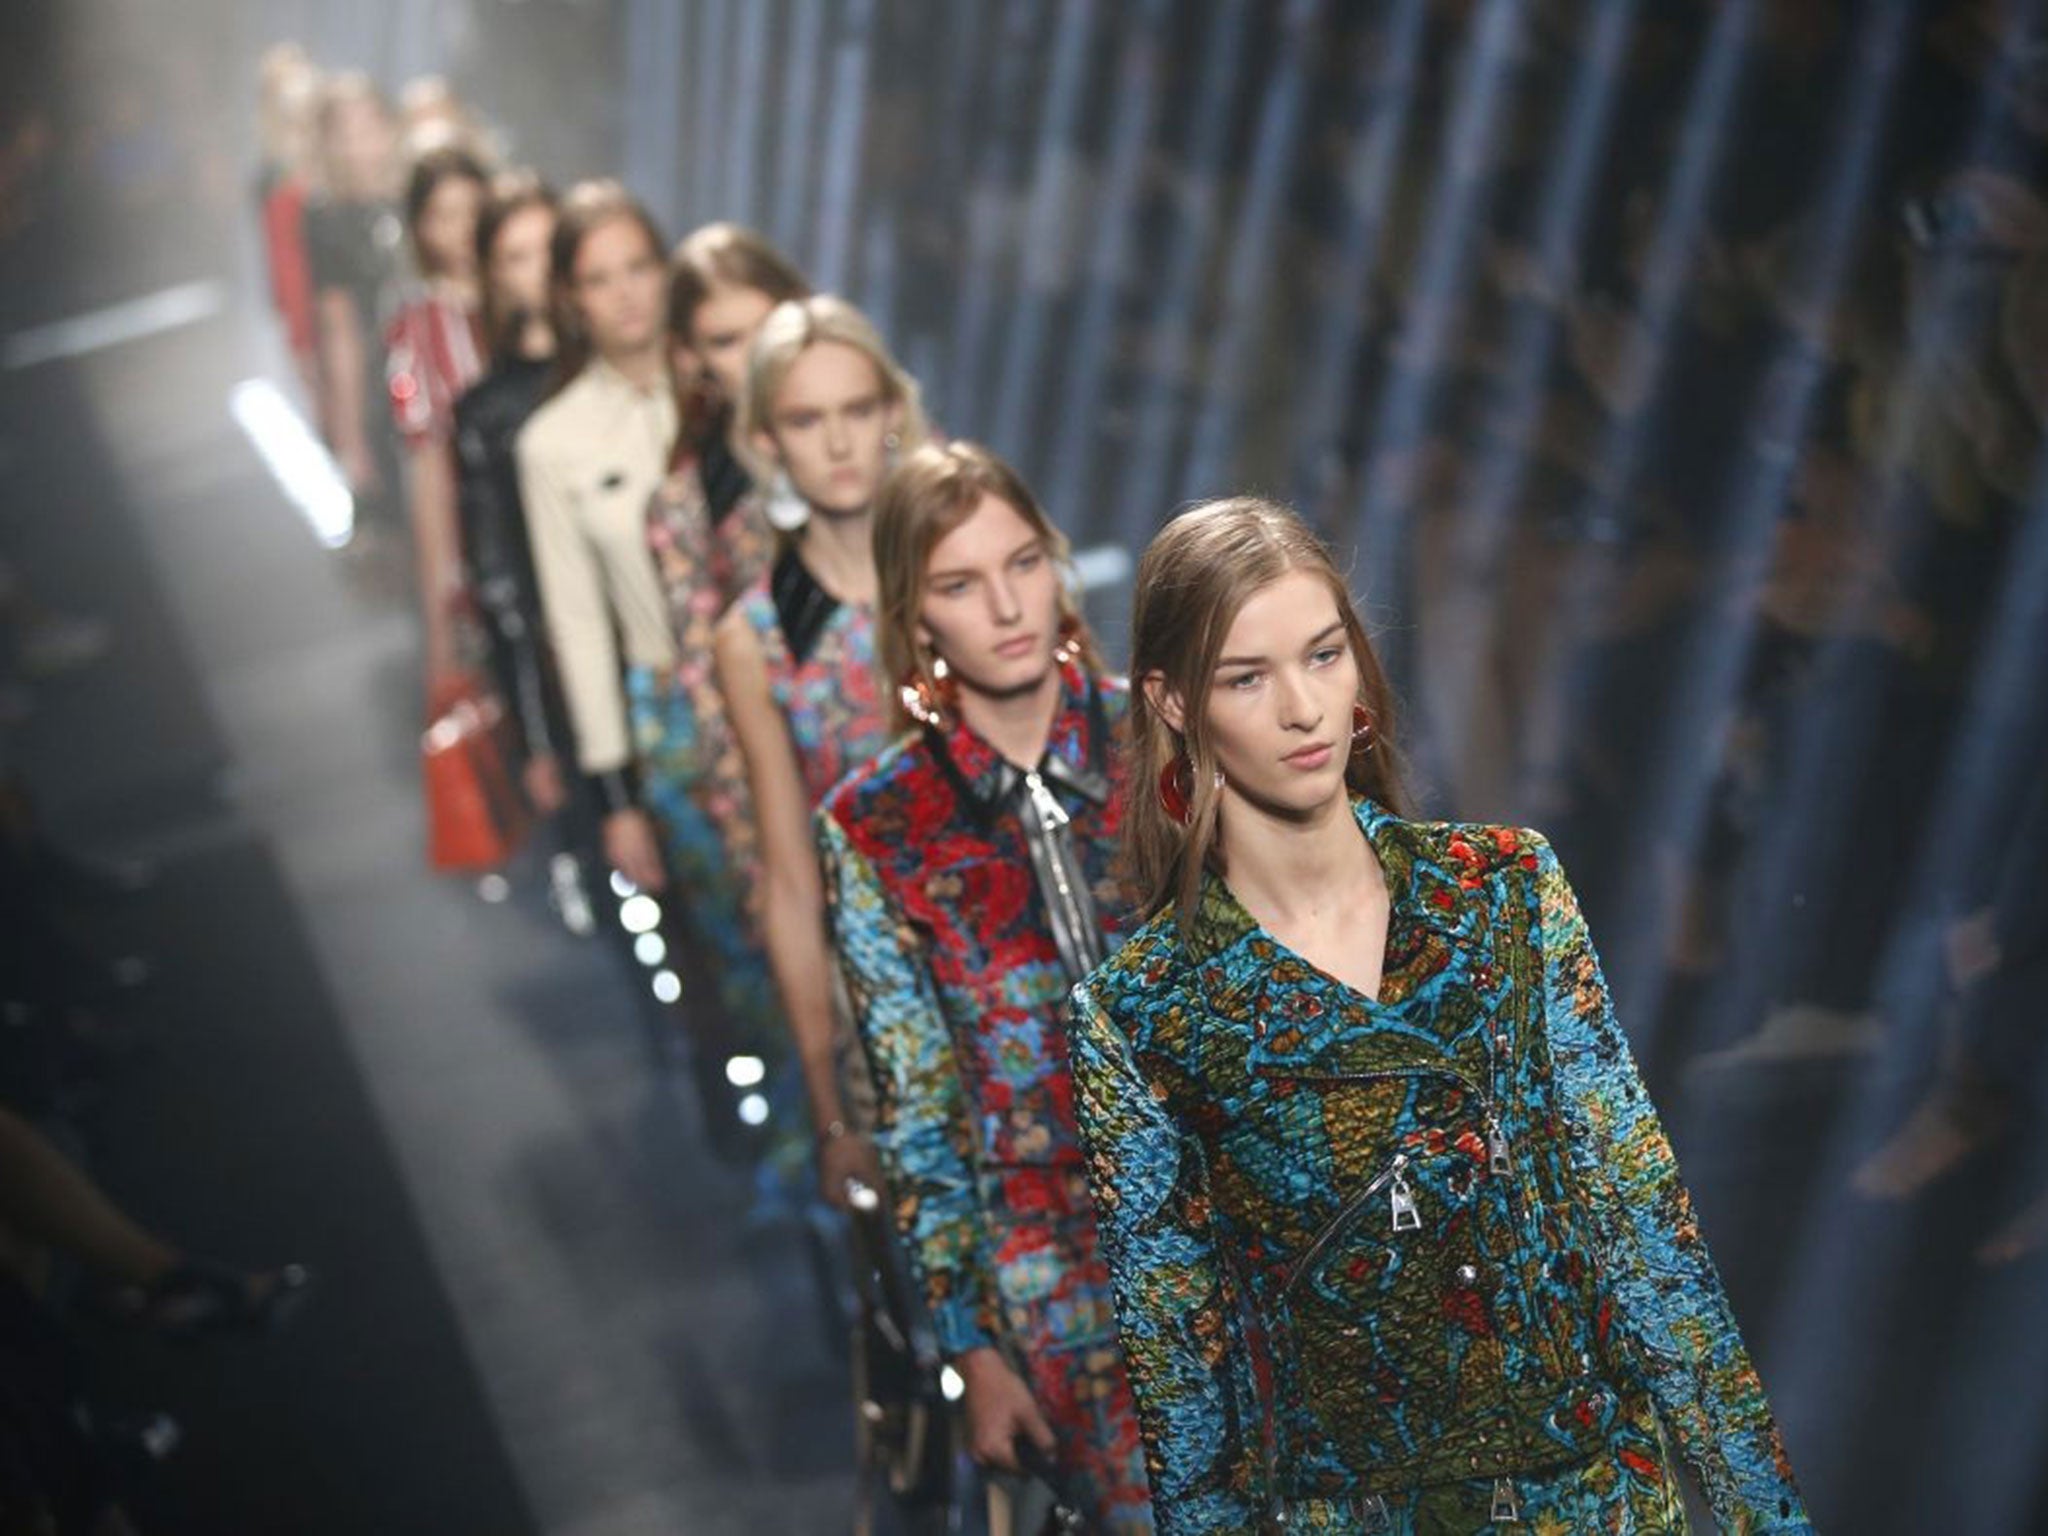 Finale at Louis Vuitton's Spring/Summer 2015 ready-to-wear fashion collection presented in Paris